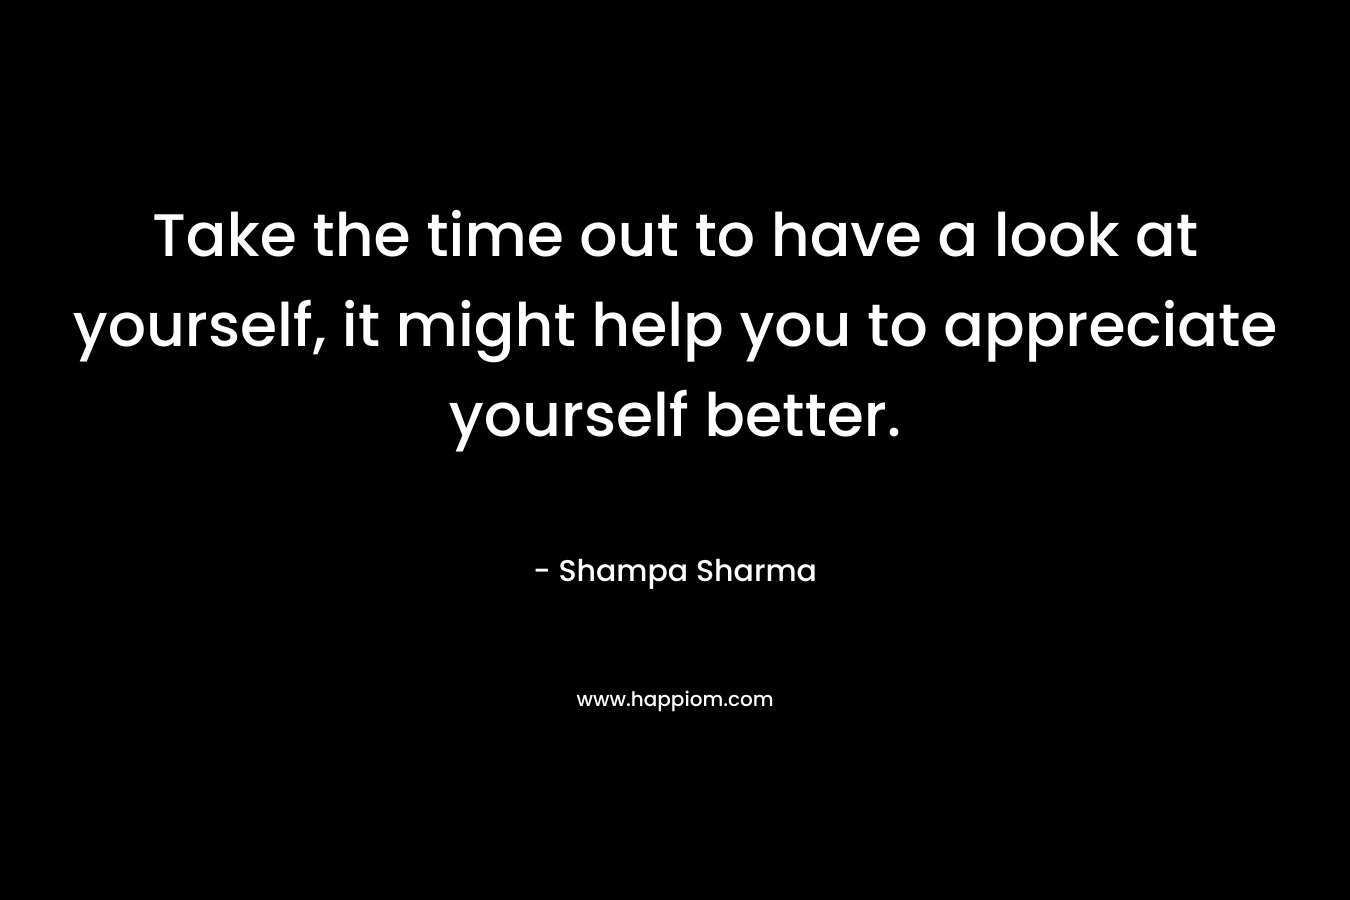 Take the time out to have a look at yourself, it might help you to appreciate yourself better.